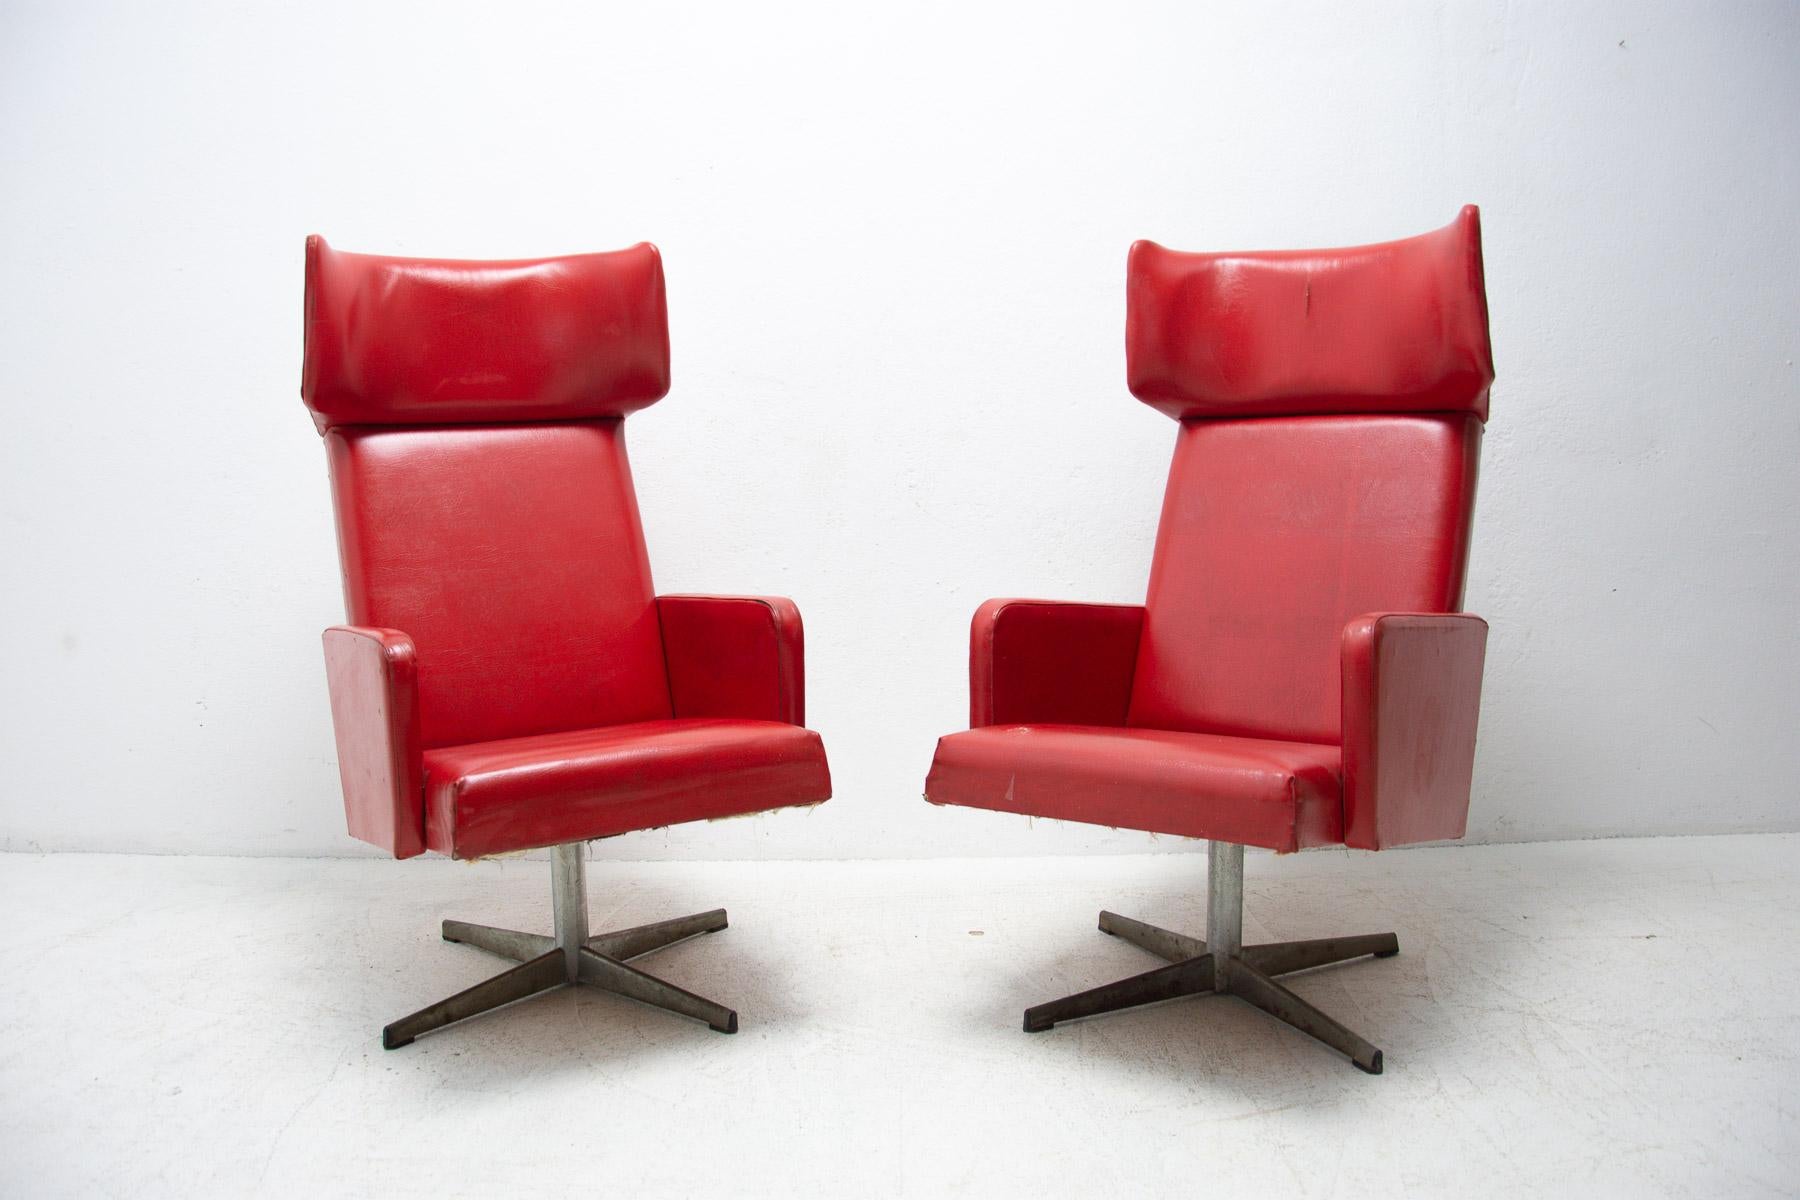 These armchairs were made in the former Czechoslovakia in the 1970´s. The chairs are upholstered with red leatherette. The legs are made from iron. All in original condition.
The upholstery showing significant signs of age and using and is suitable